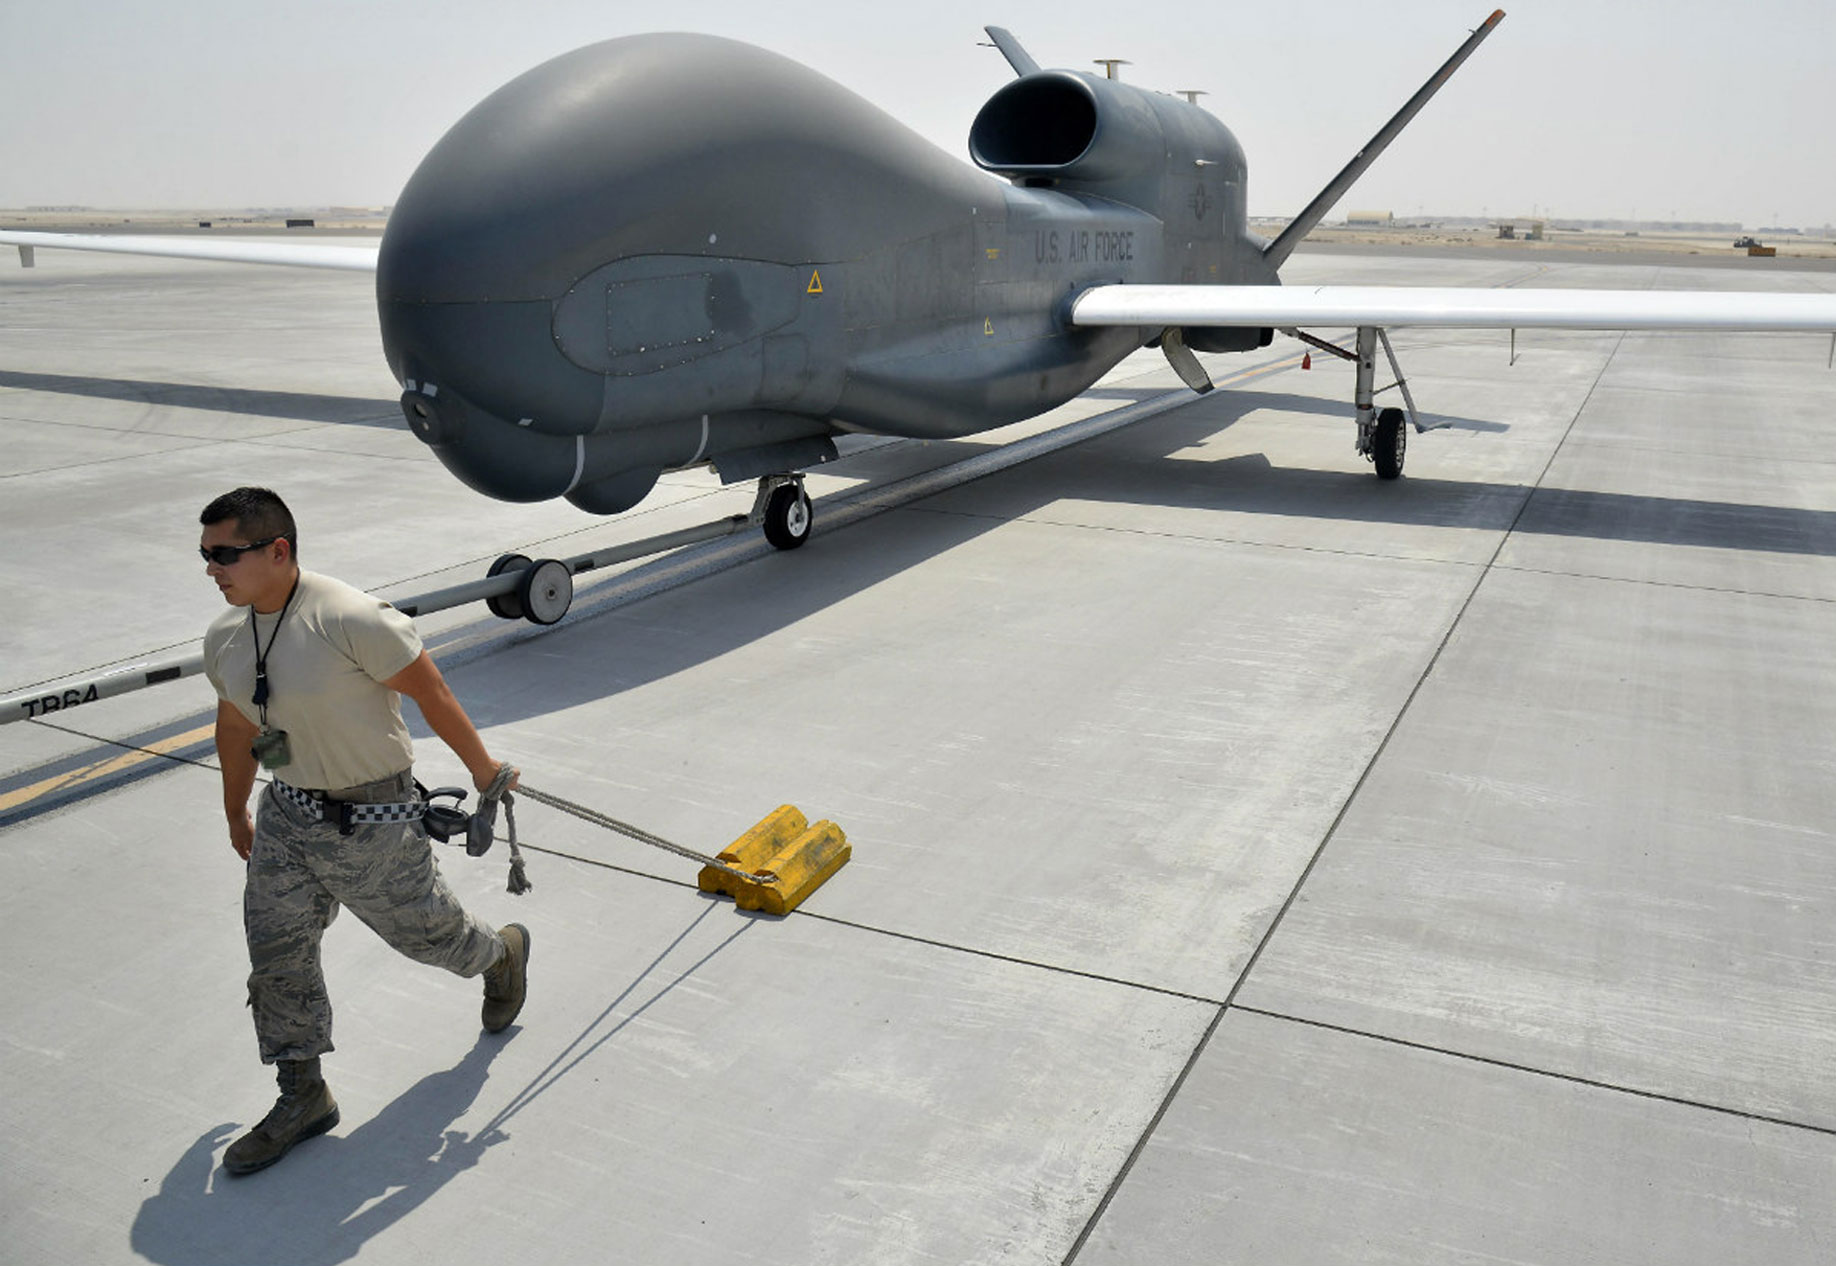 Incredible Us Military Drone Image Photos Pictures